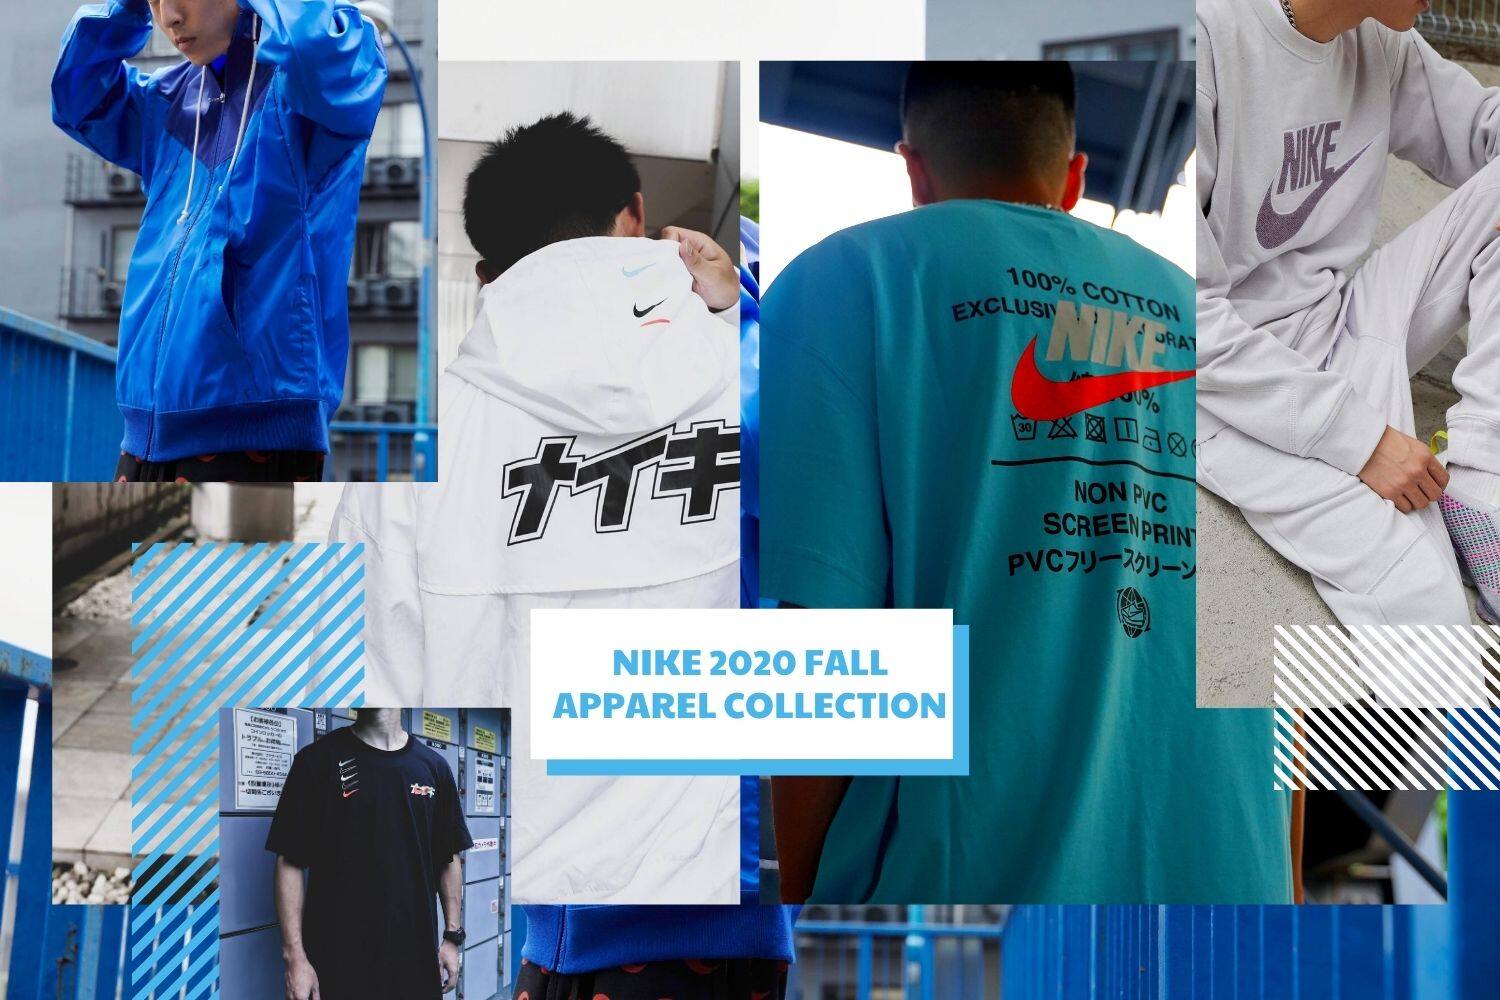 NIKE 2020 FALL APPAREL COLLECTION